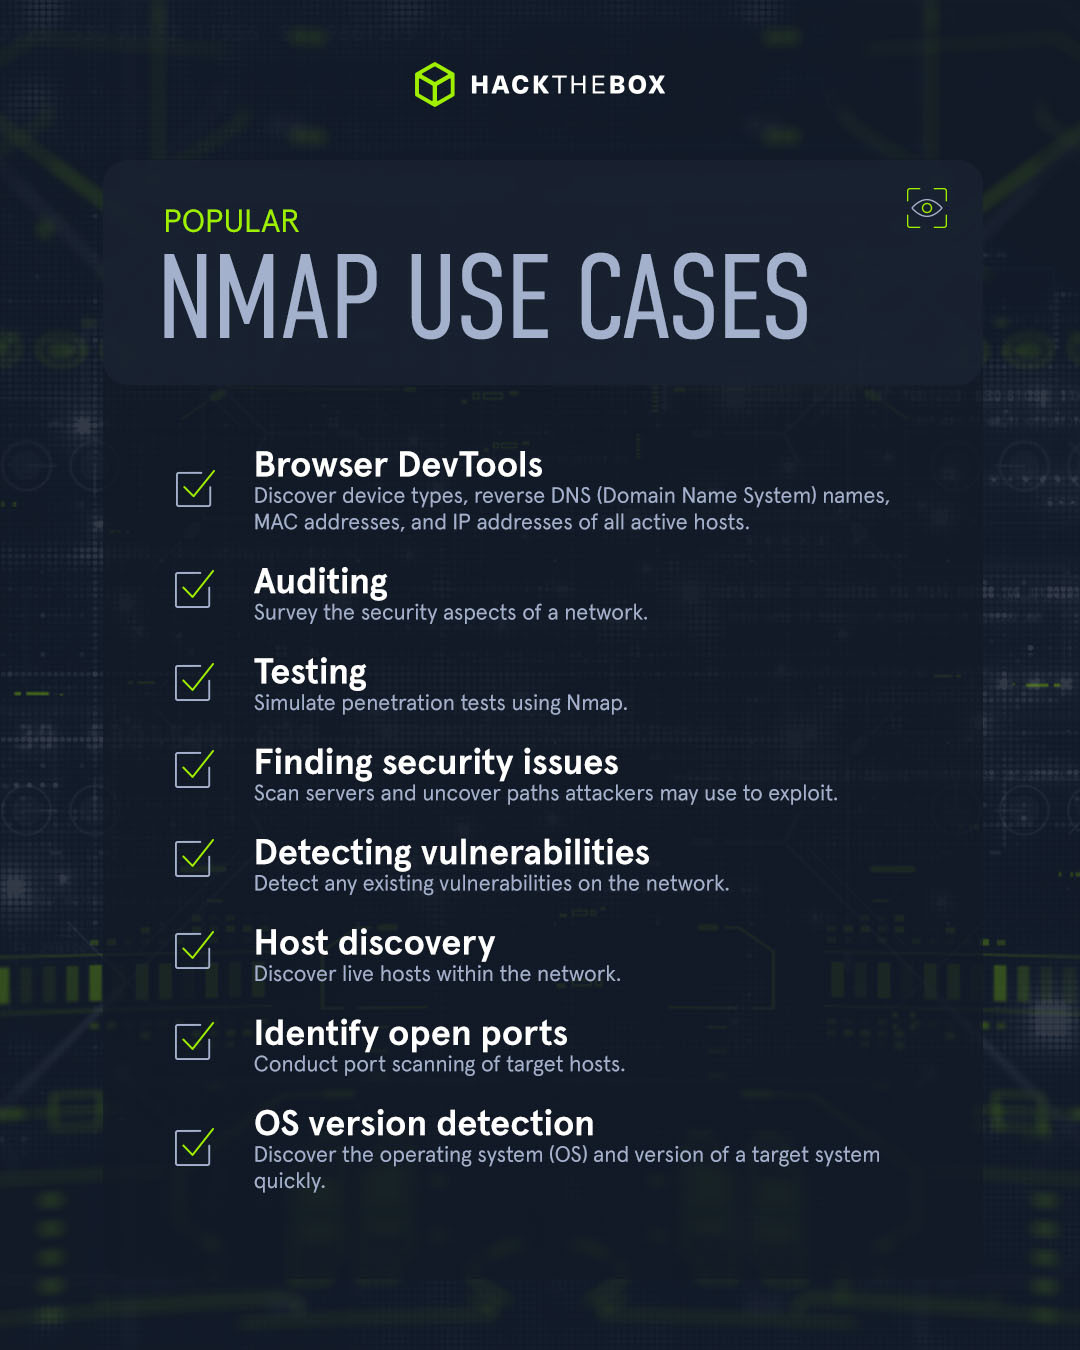 Nmap use cases